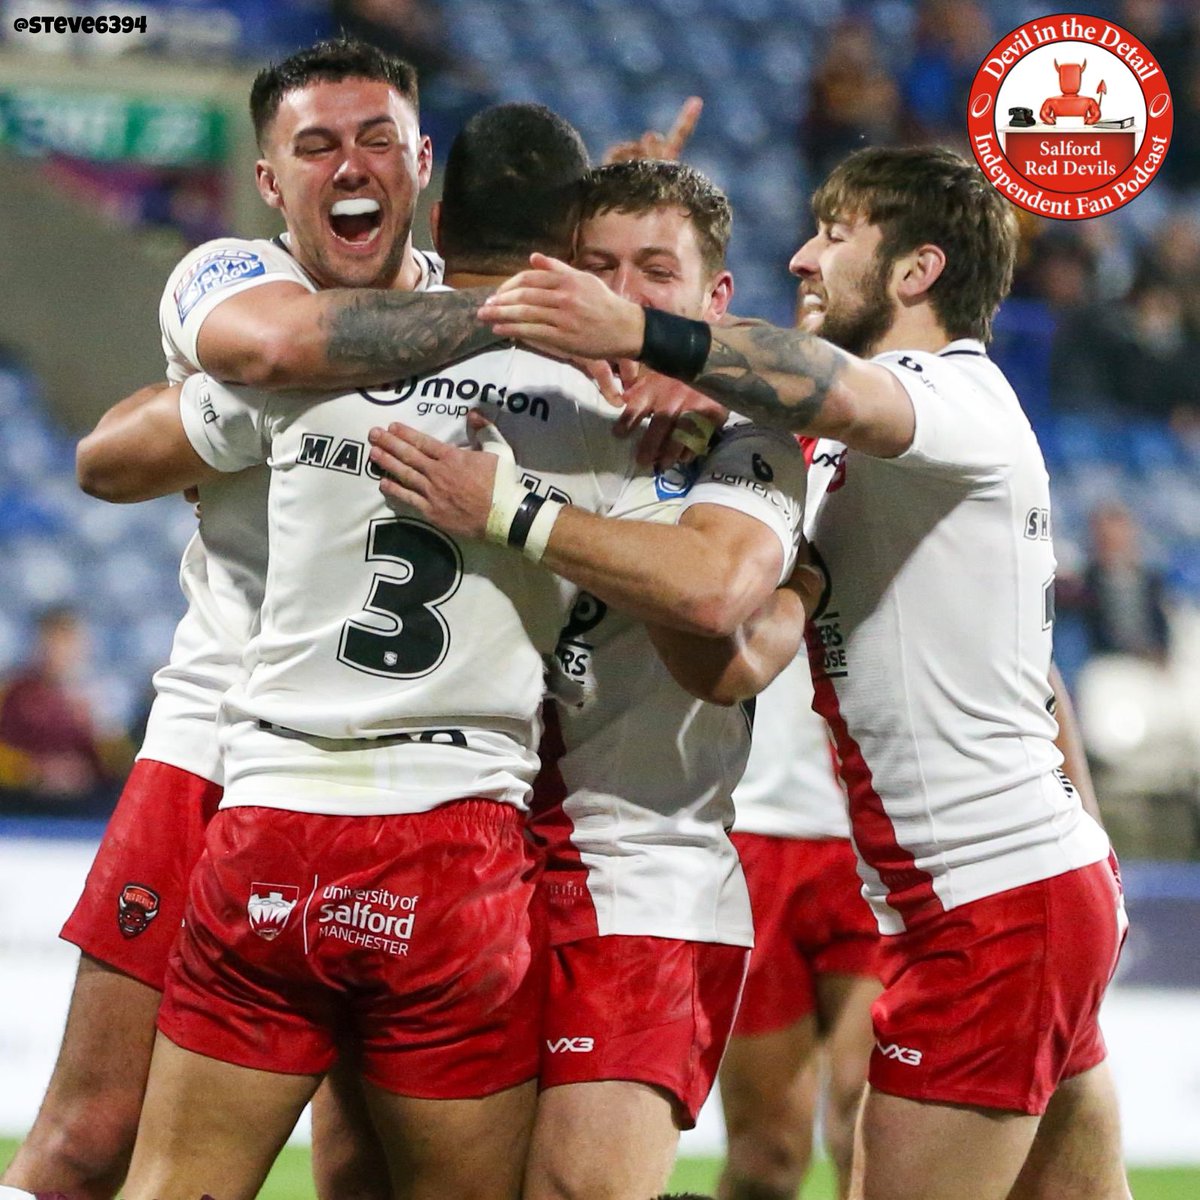 Salford win away at Huddersfield 16-18 give us your 3 word match reports and man of the Match
#salfordreddevils 👹🏉